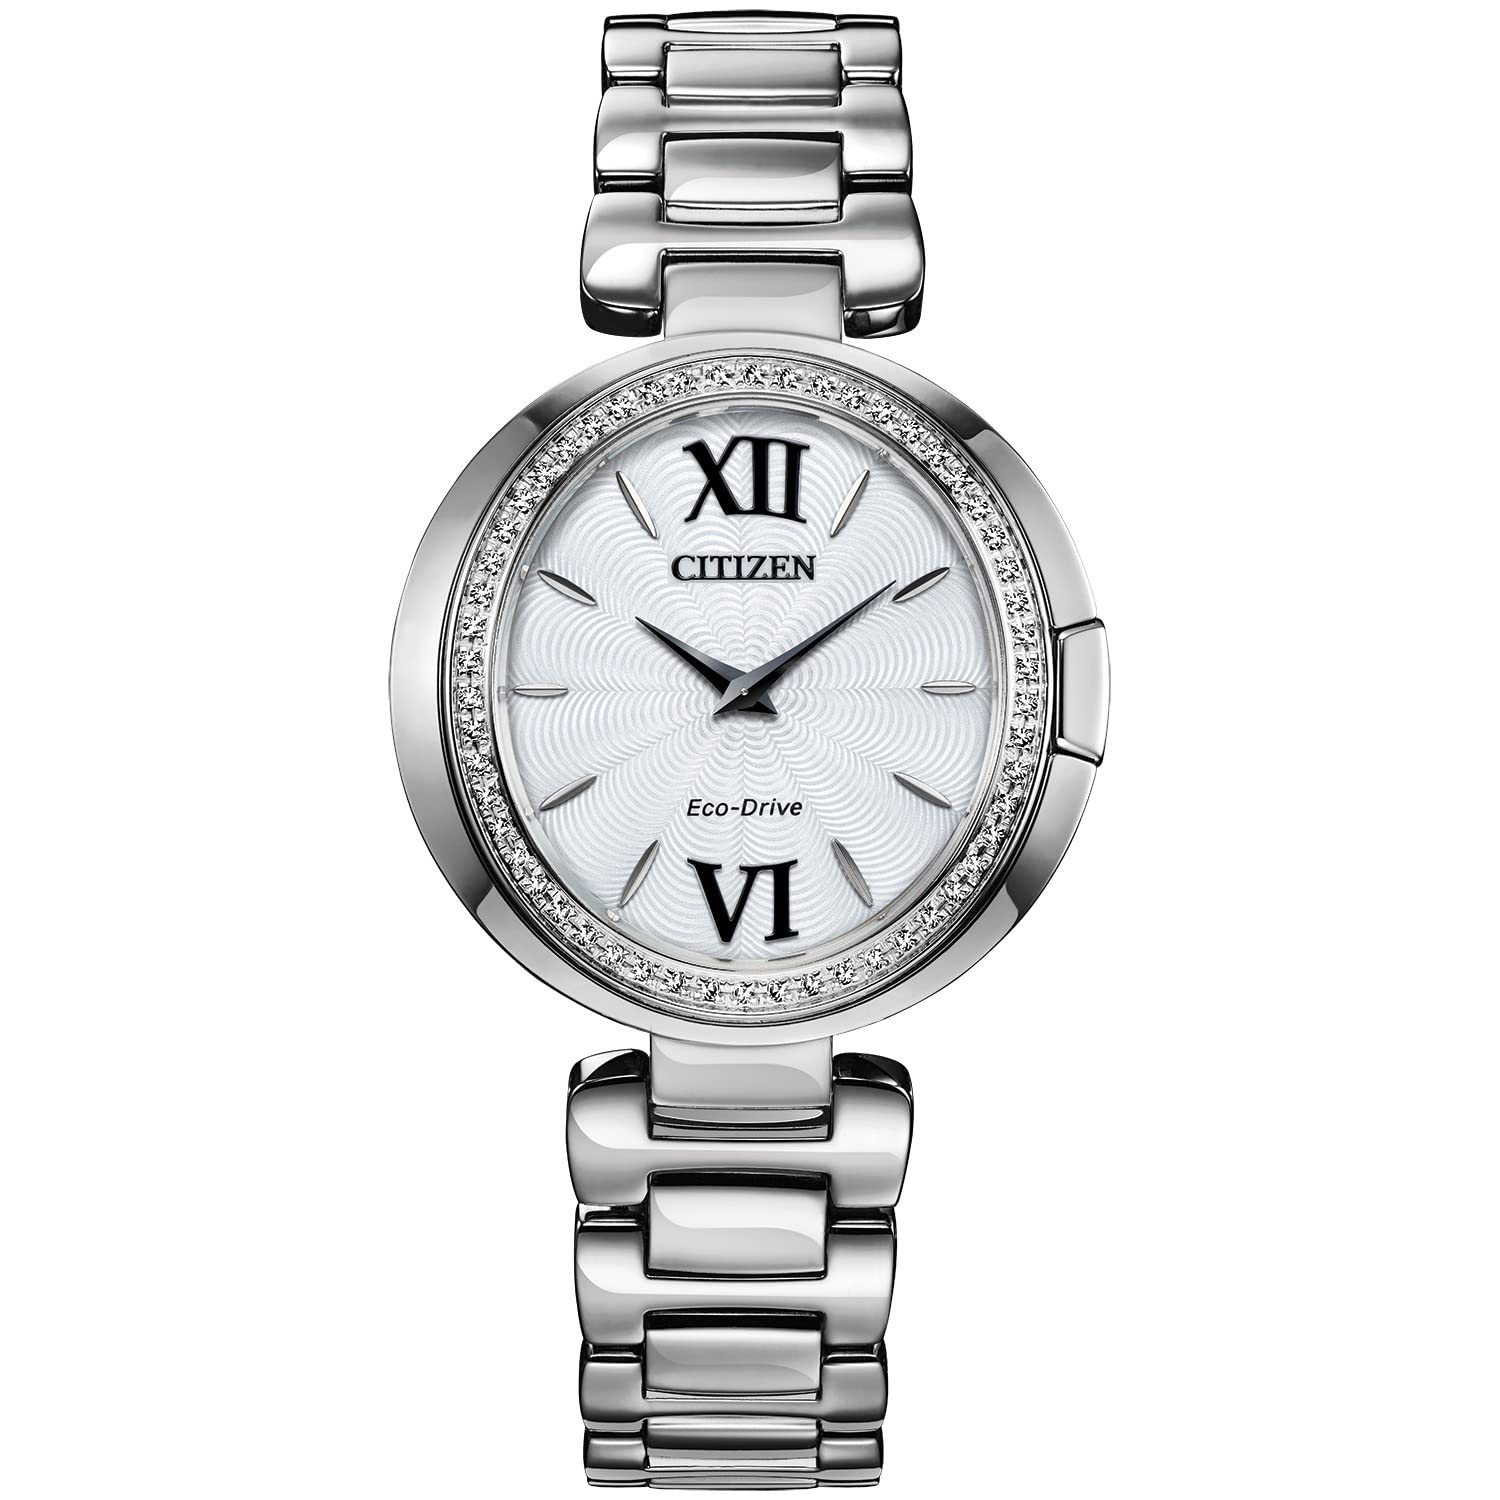 Citizen Women's Capella Eco-Drive Watch, Stainless Steel